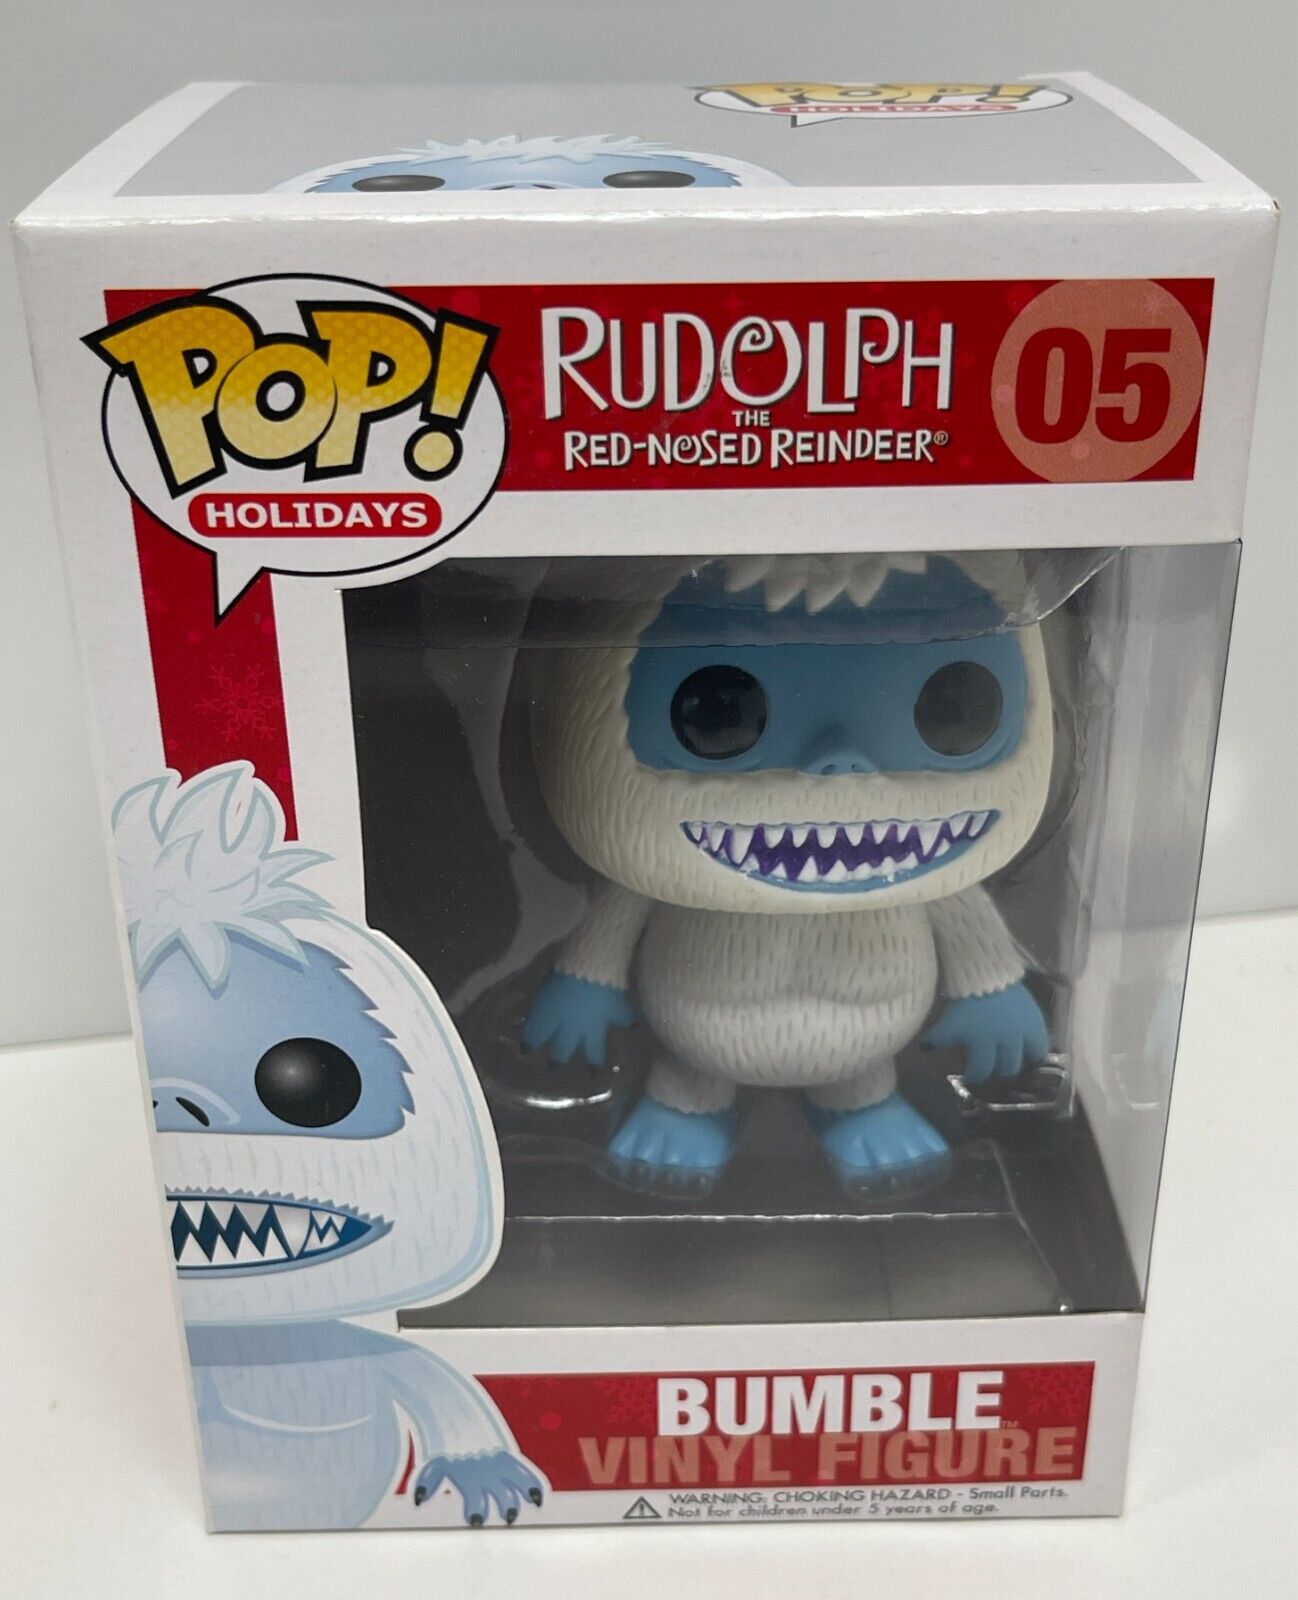 Funko Pop Vinyl: Rudolph the Red-Nosed Reindeer - Bumble #05 Abominable Snowman